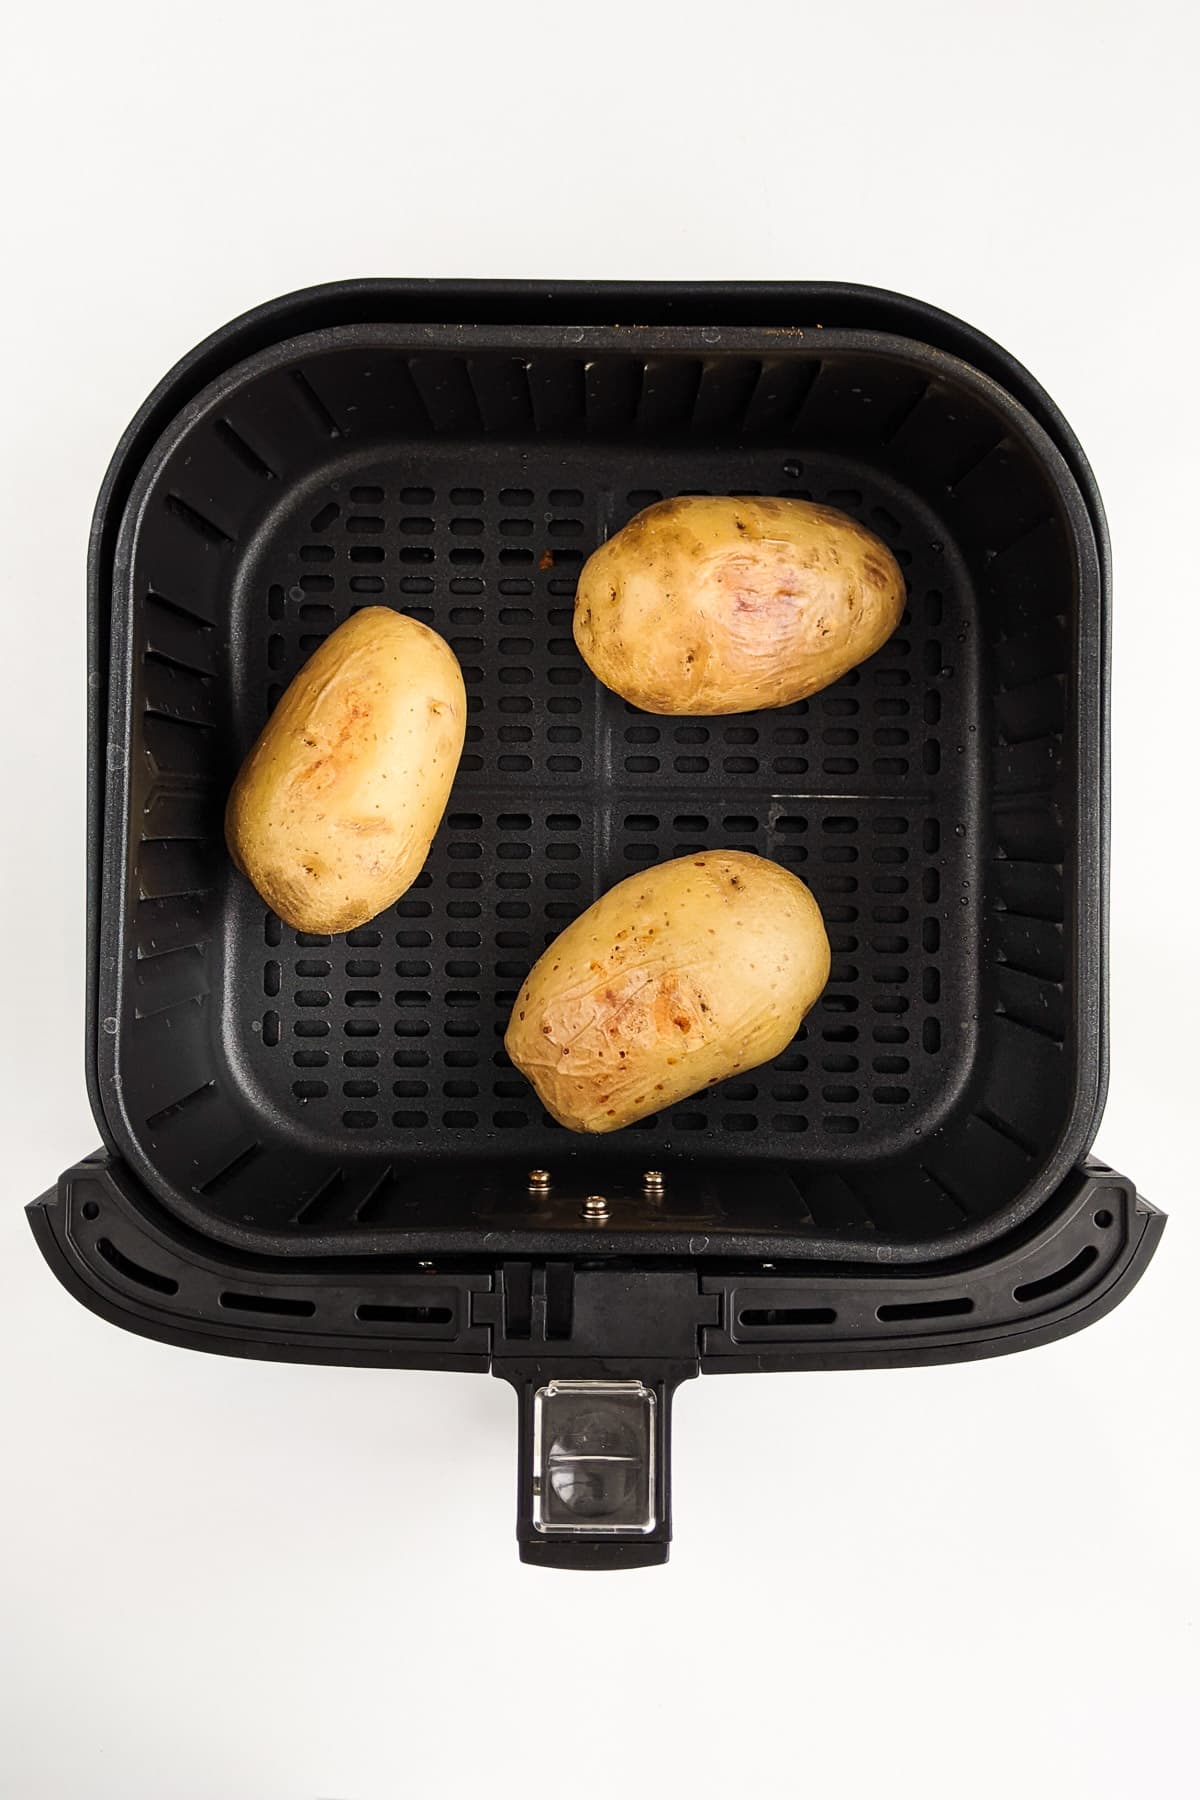 Top view of three baked potatoes in the air fryer basket.